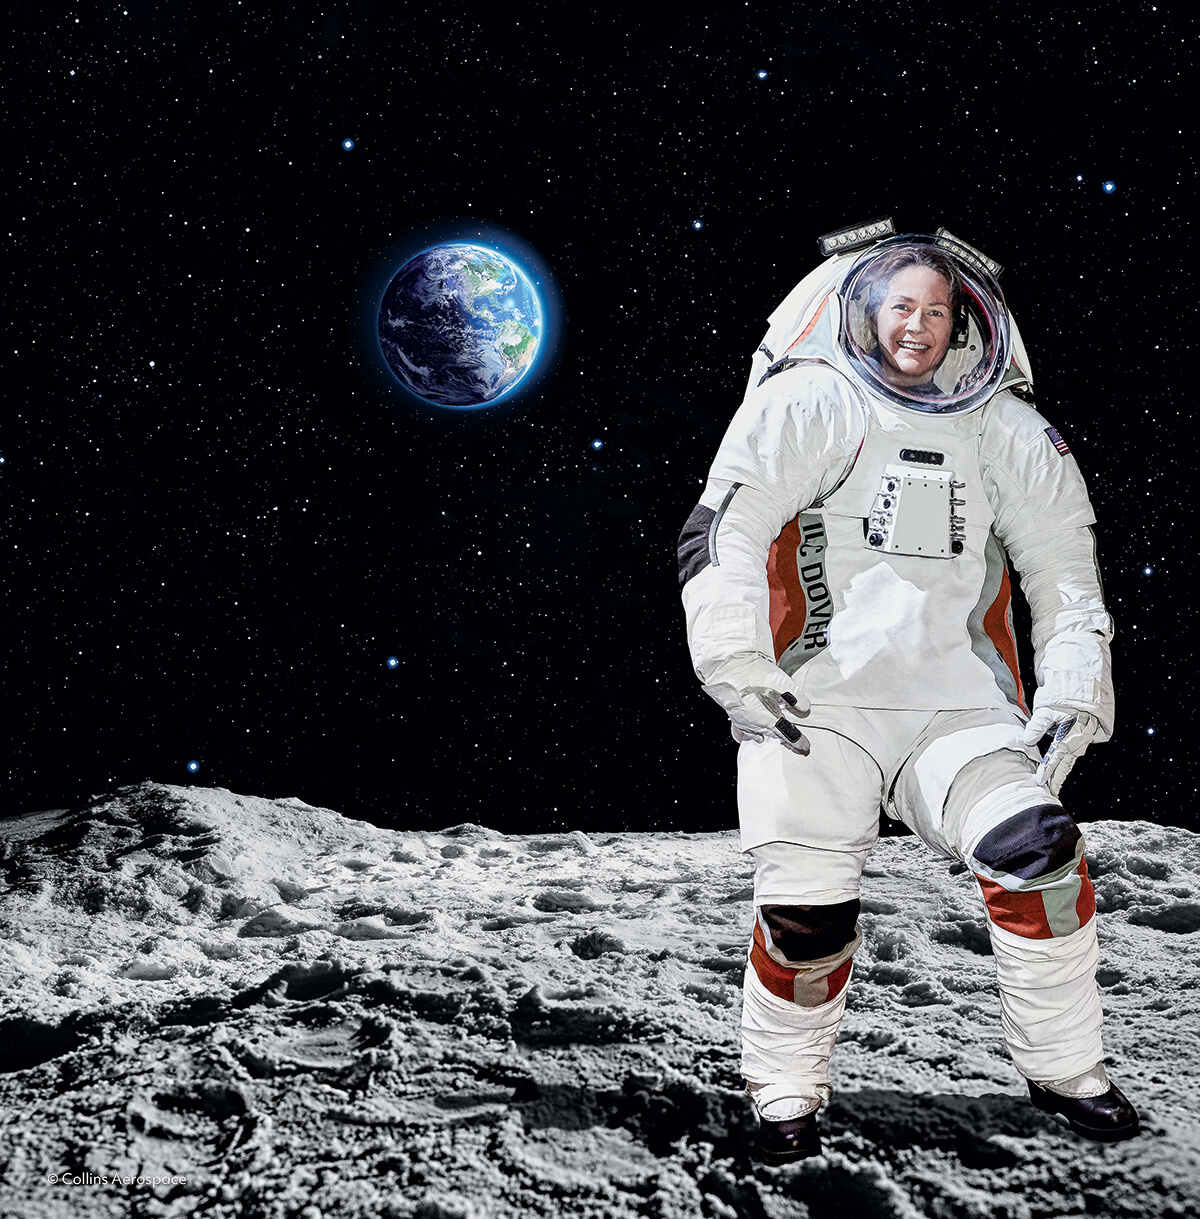 Rendering of an astronaut wearing a new spacesuit and standing on the moon with Earth in the background.